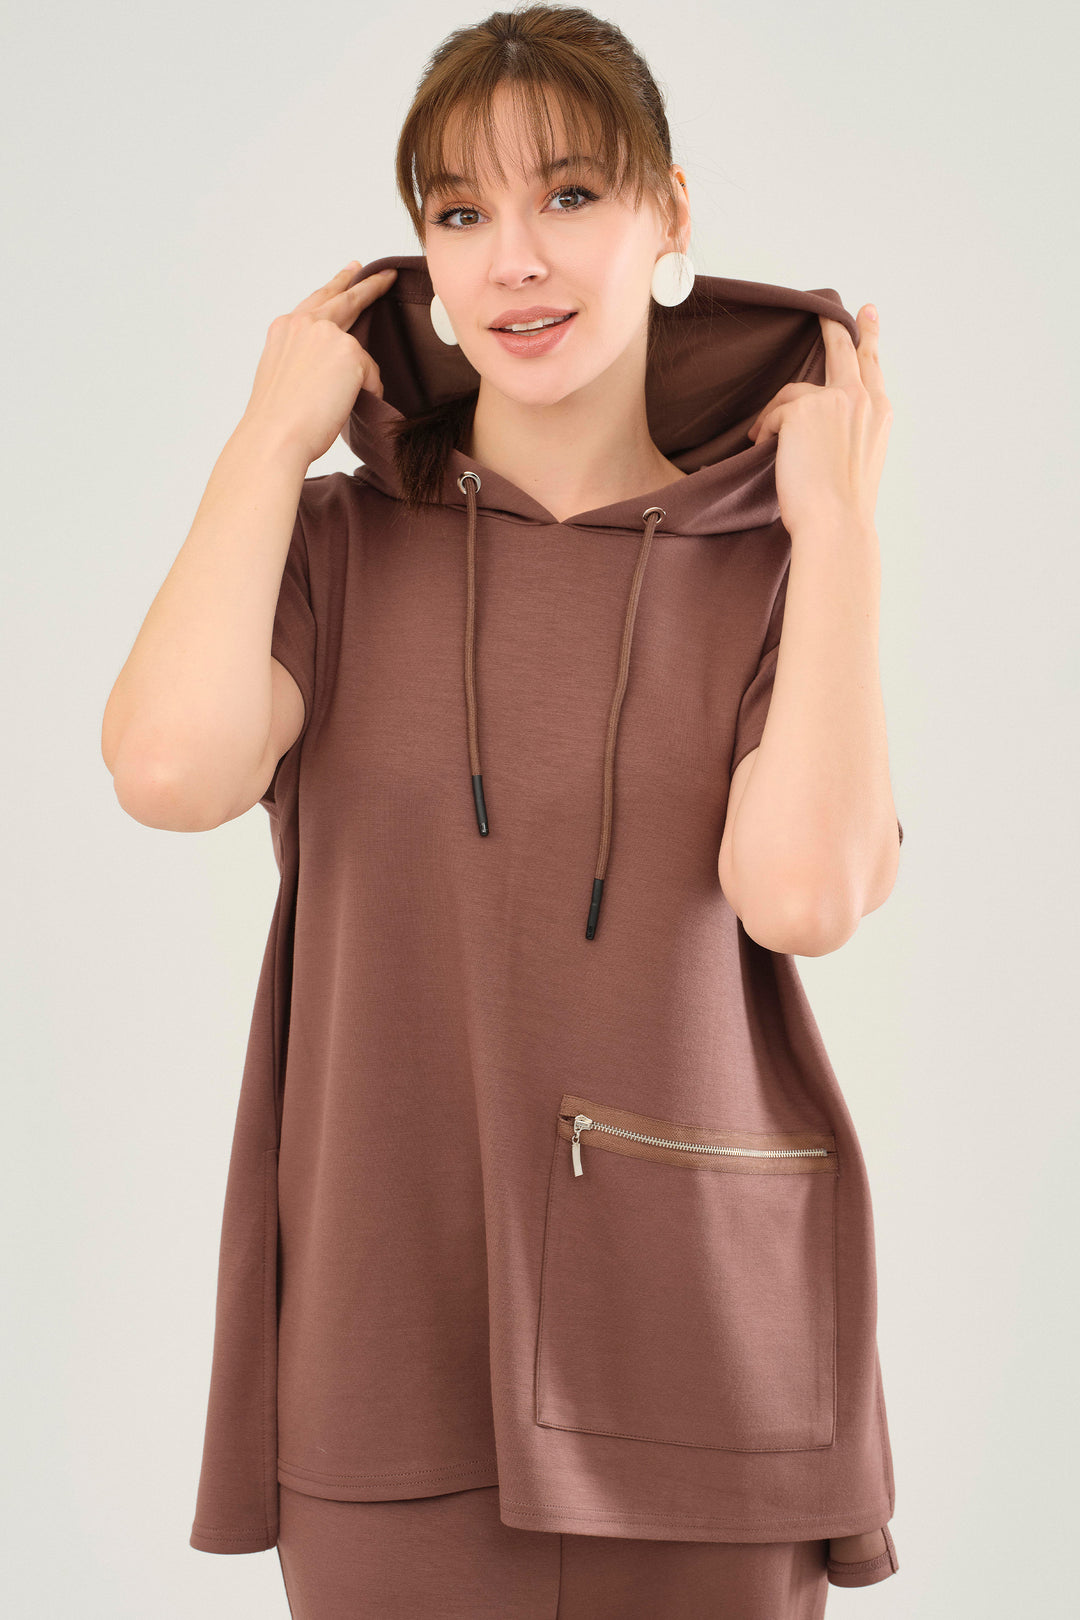 It is beautifully constructed with a luxe sweet chocolate hue and a hooded neckline. A large side pocket adds an extra touch of practicality, while the lower back hem provides a figure-flattering looser fit. 